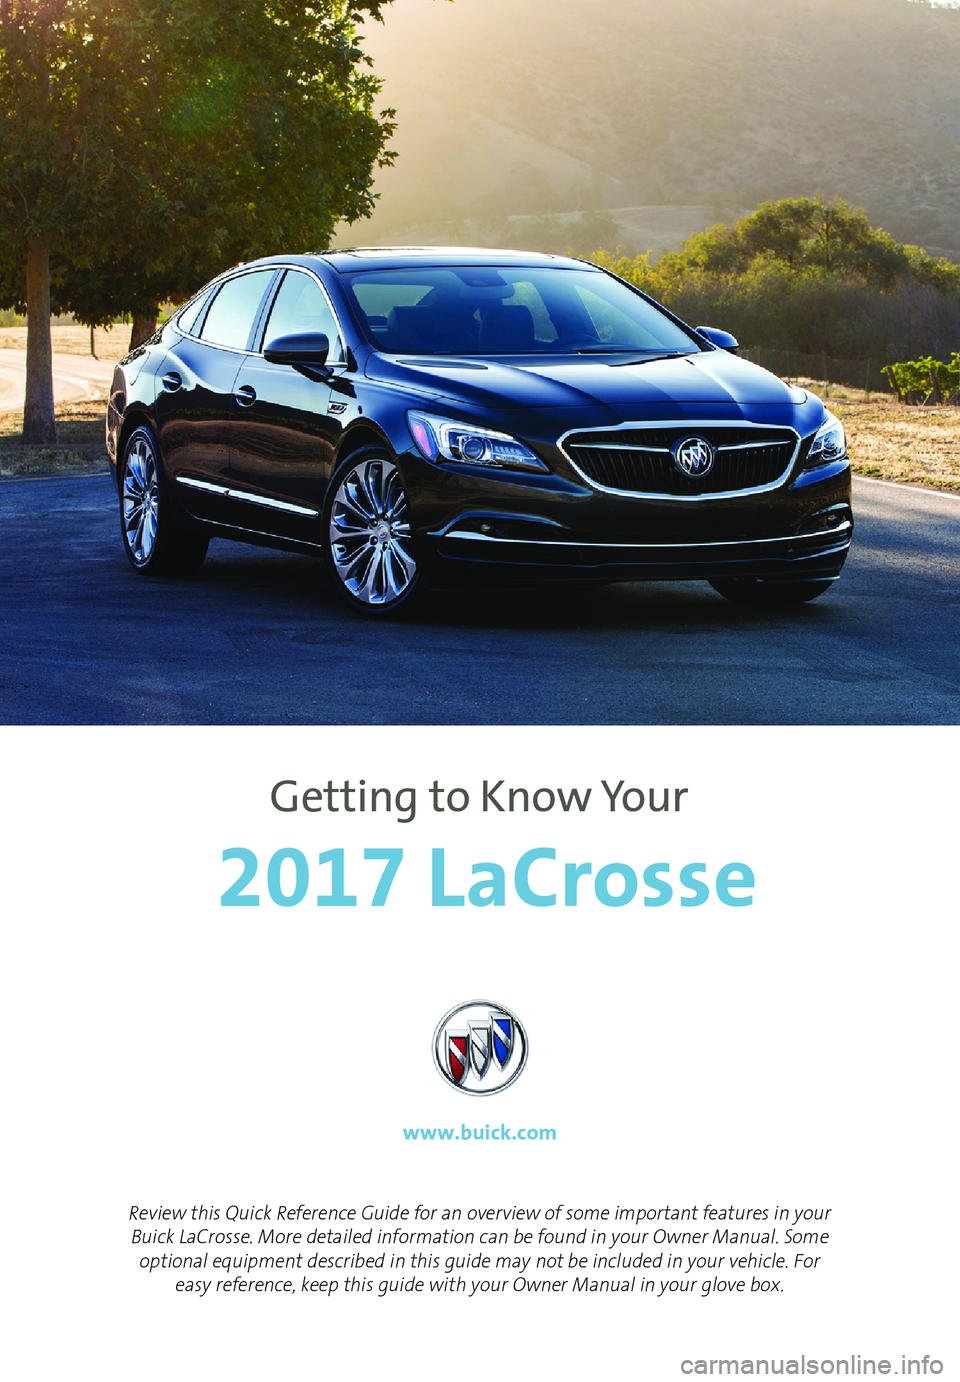 BUICK LACROSSE 2017  Get To Know Guide 